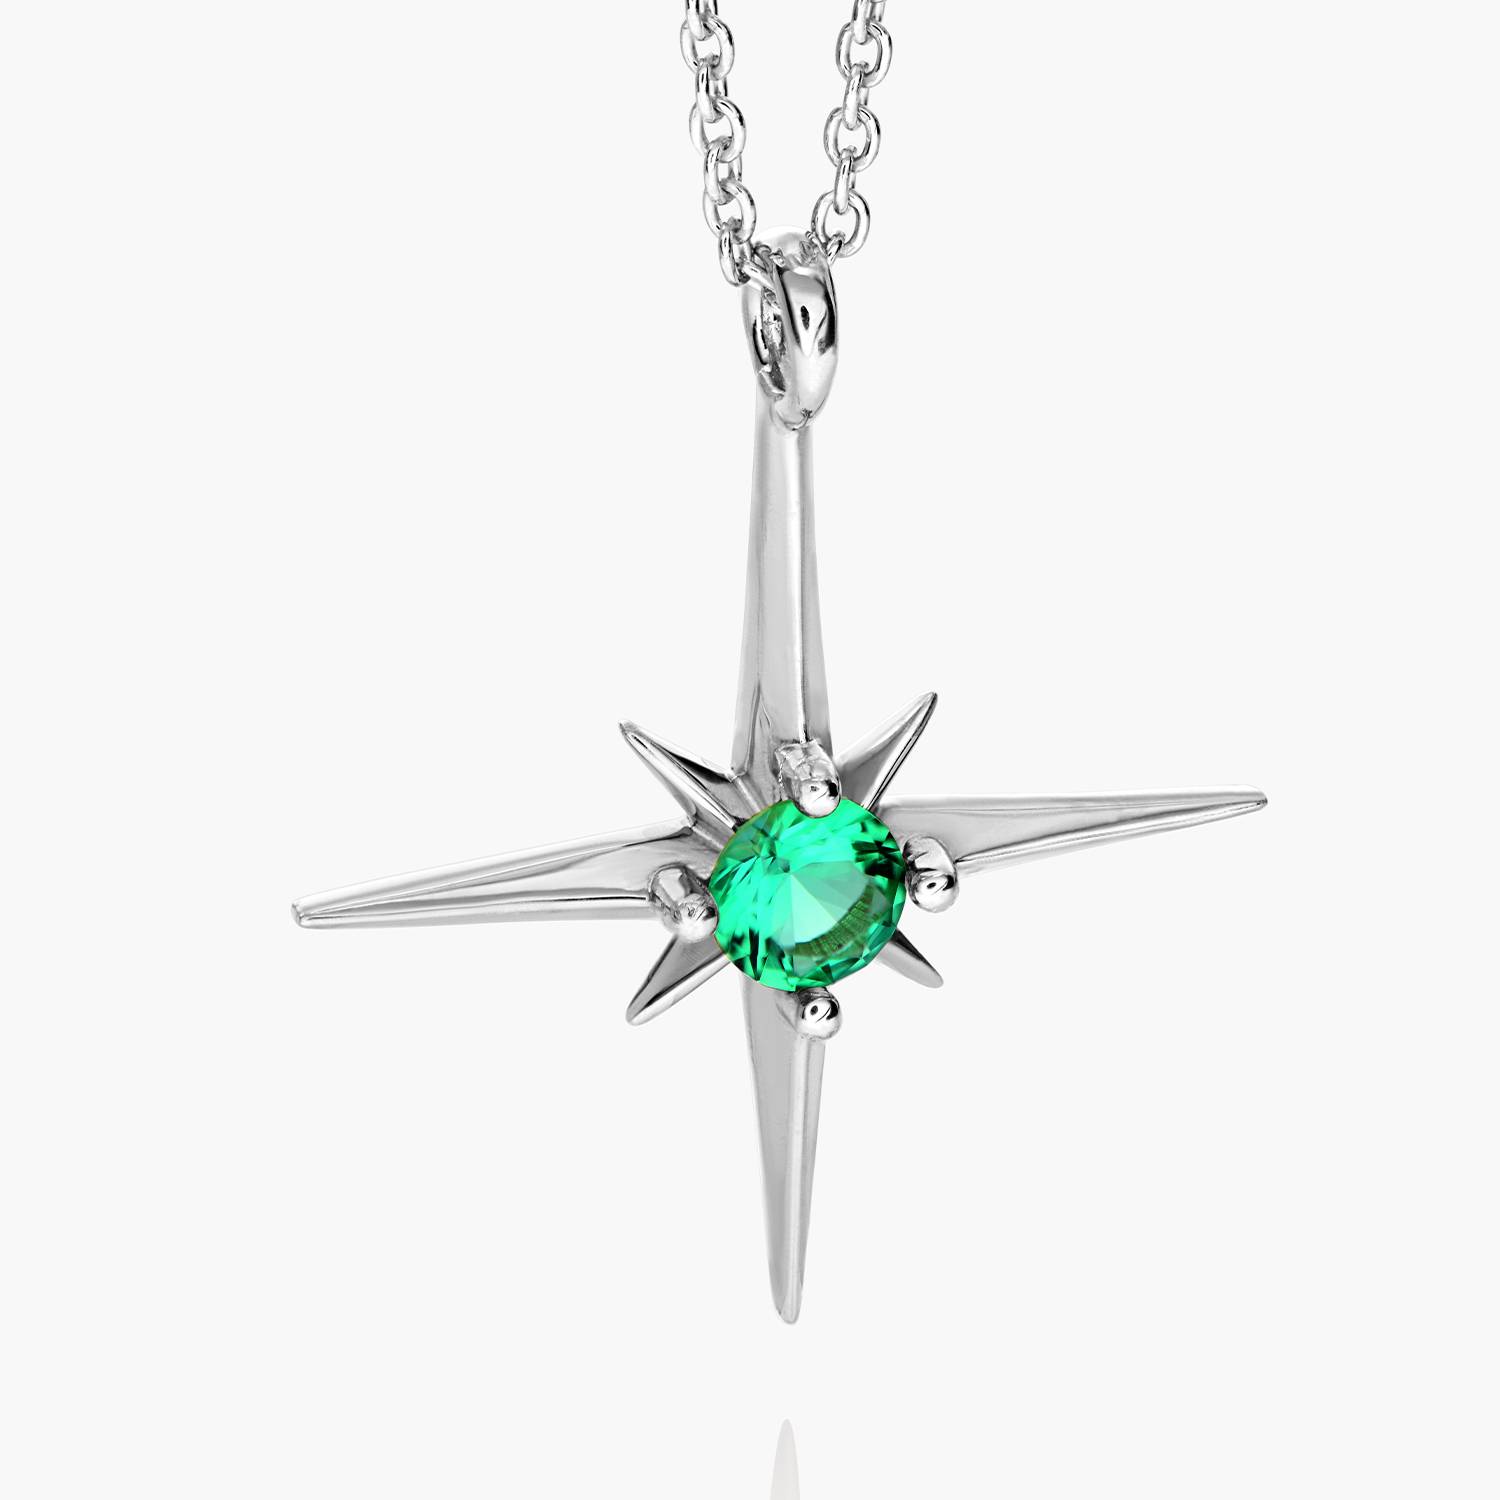 Engraved Northern Star Necklace with 0.3ct Green Emerald Gemstone - Silver-1 product photo